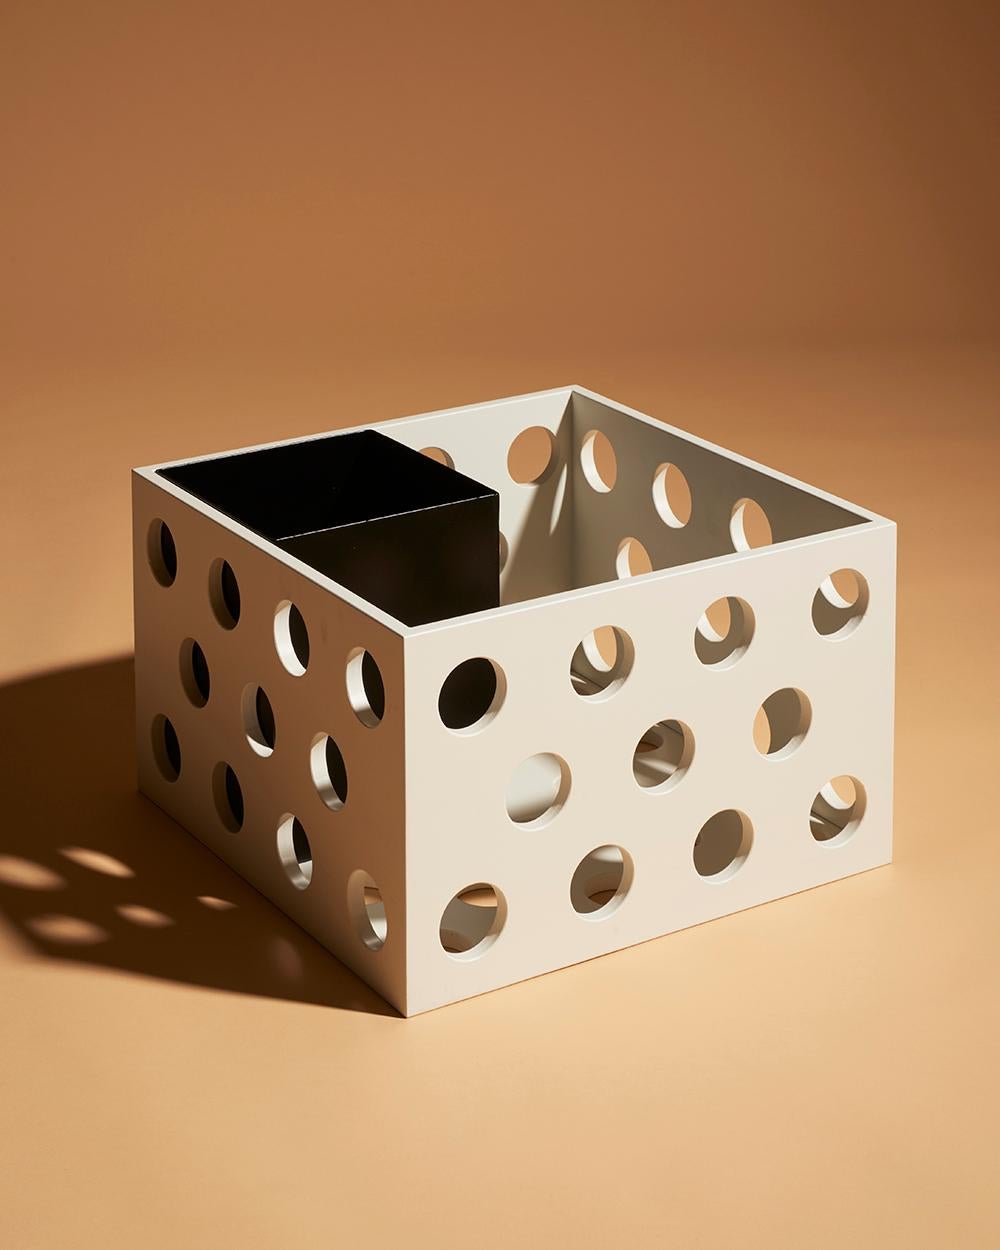 Wooden storage box made in holed solid birch wood. Large holes creates a distinct graphic look and allows light to flow through. The boxes are light and easy to hold. They work both as stand alone units for storage or stacked on top in endless